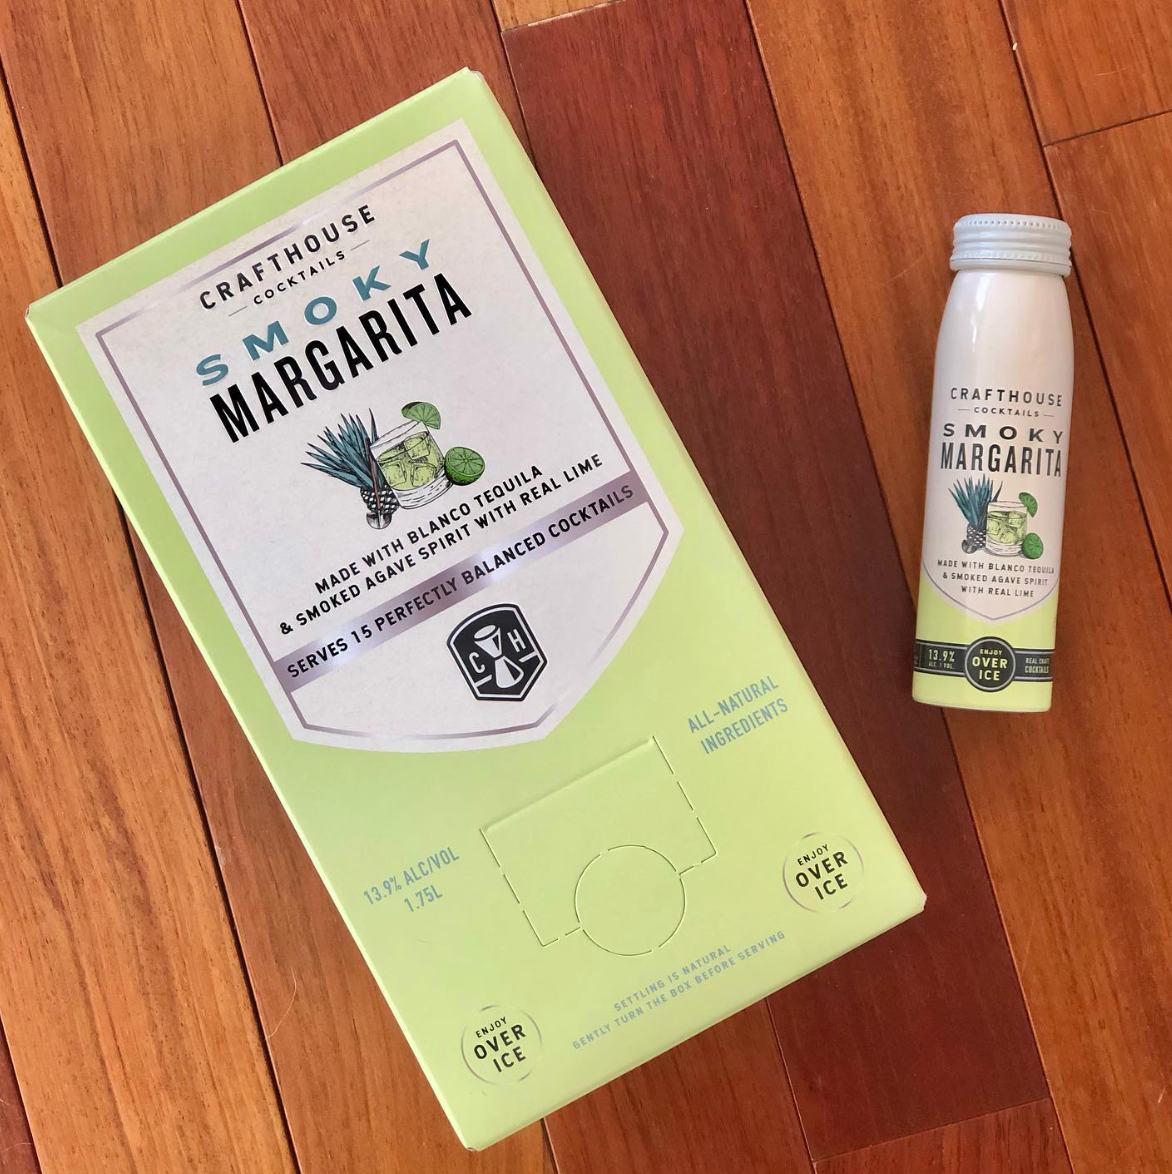 Crafthouse Cocktails Smoky Margarita 1.75L